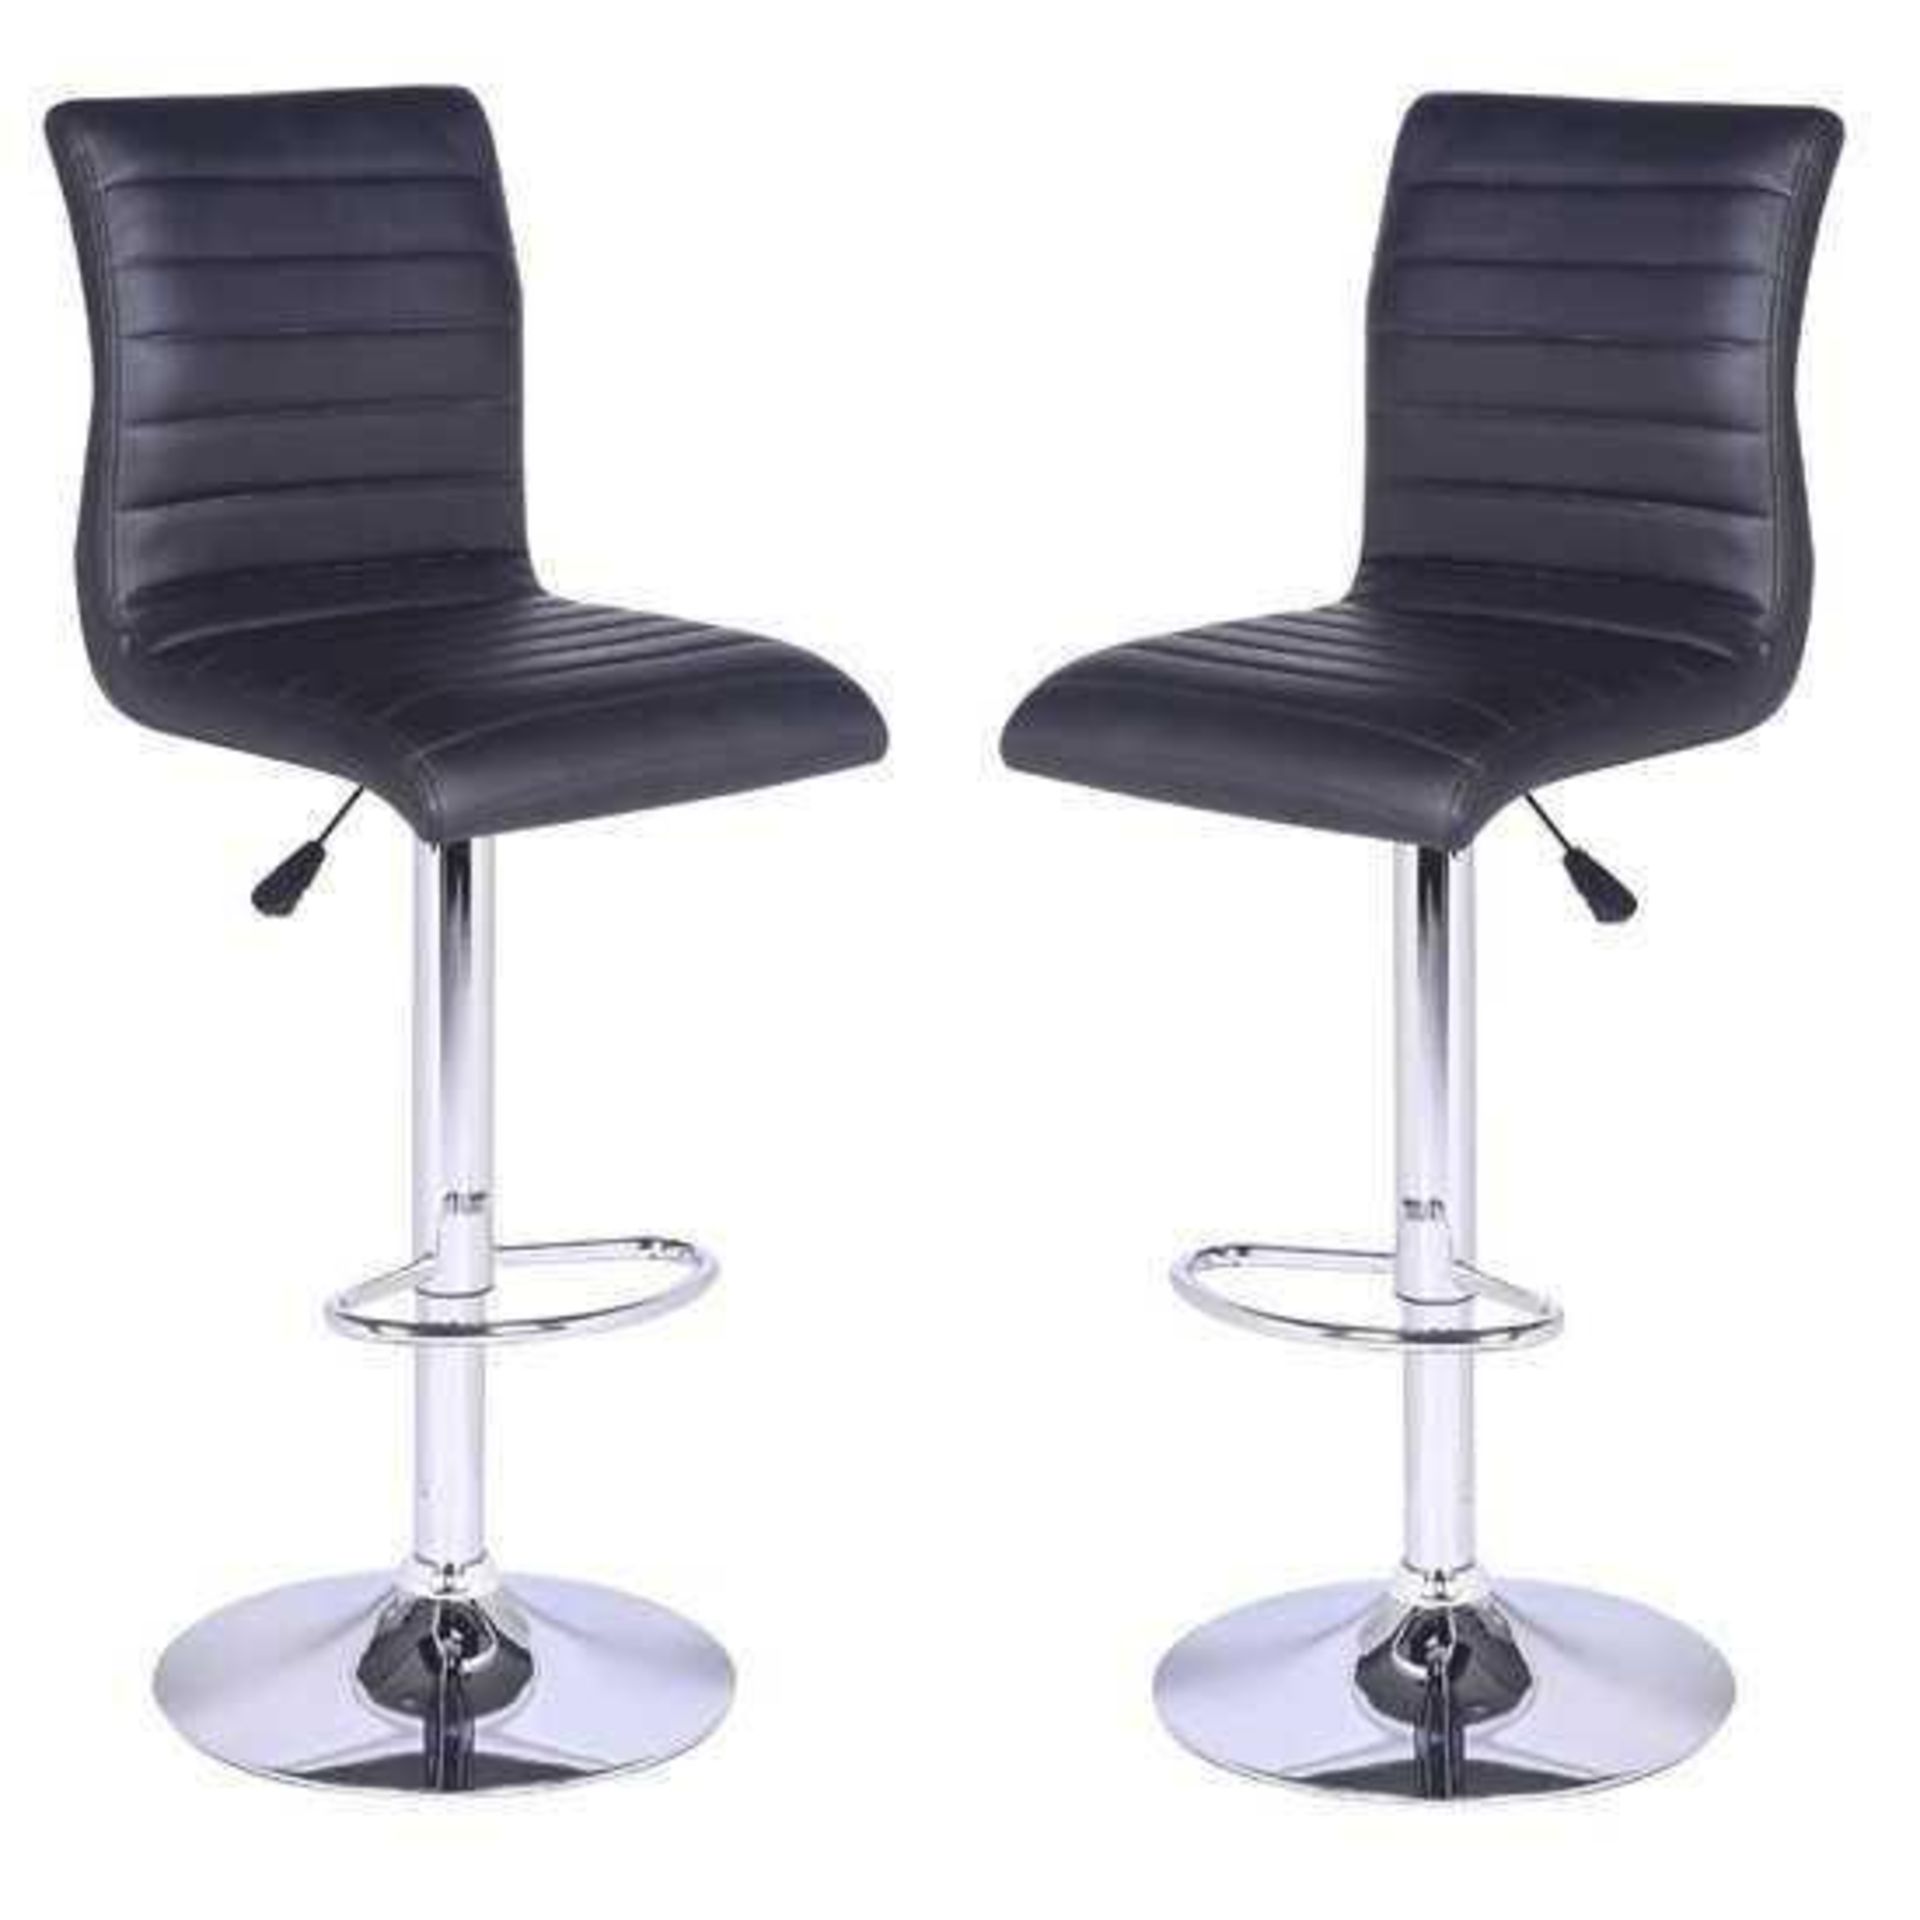 RRP £200 - 2 Boxed 'Cool' Barstools In Black Faux Leather With Chrome Base